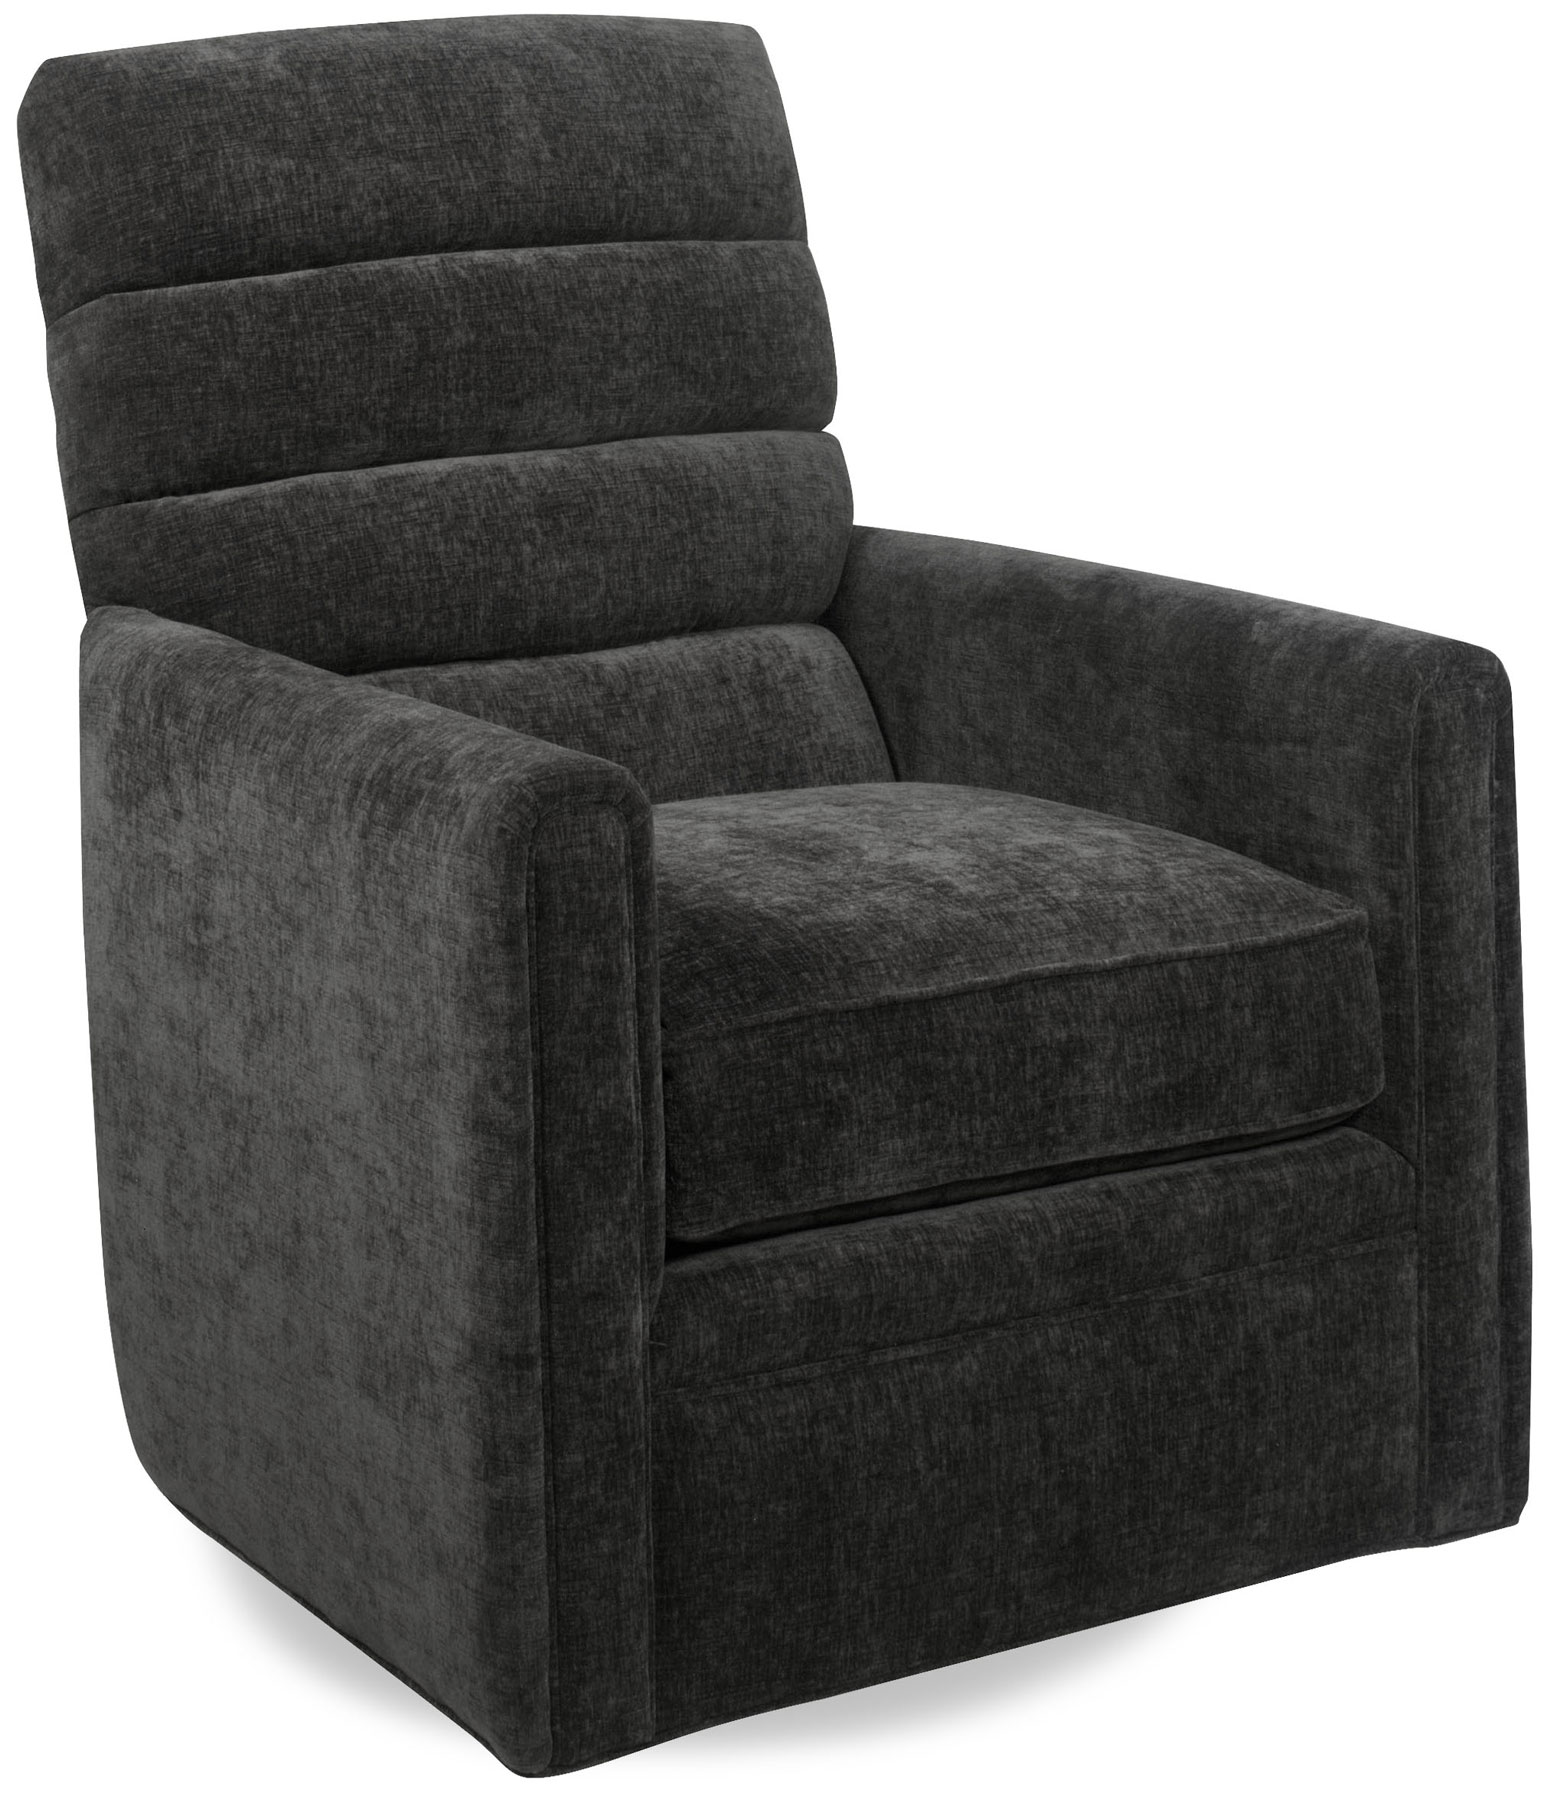 Temple Furniture 22825-S Connery Swivel Chair 